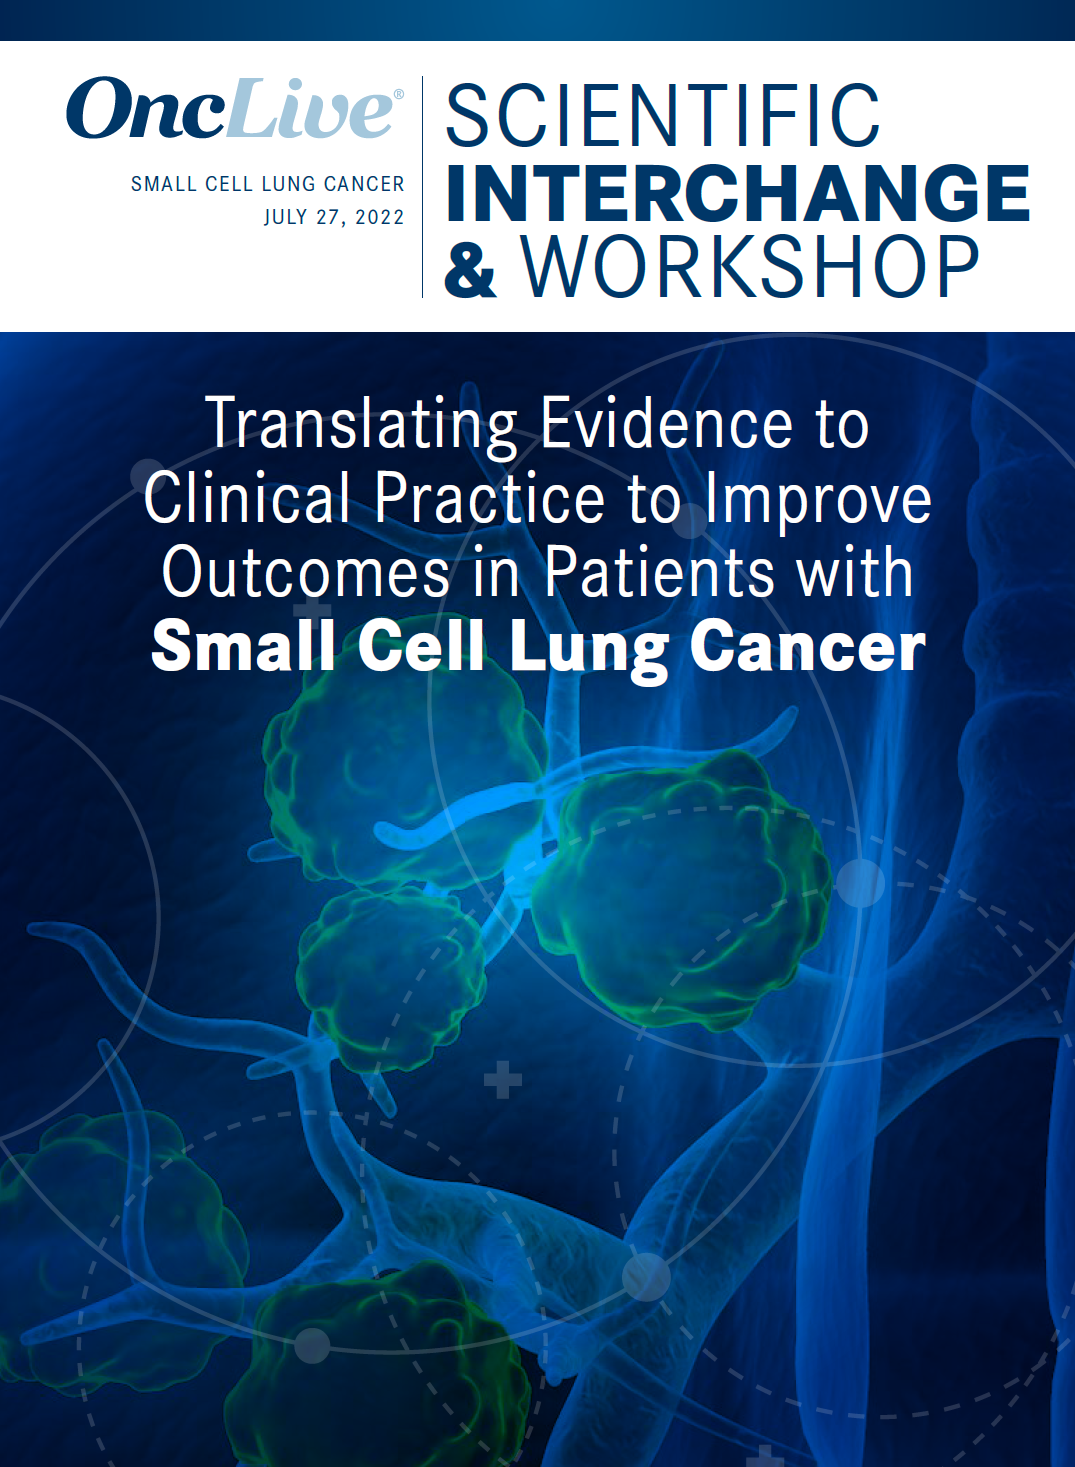 Translating Evidence to Clinical Practice to Improve Outcomes in Patients with Small Cell Lung Cancer